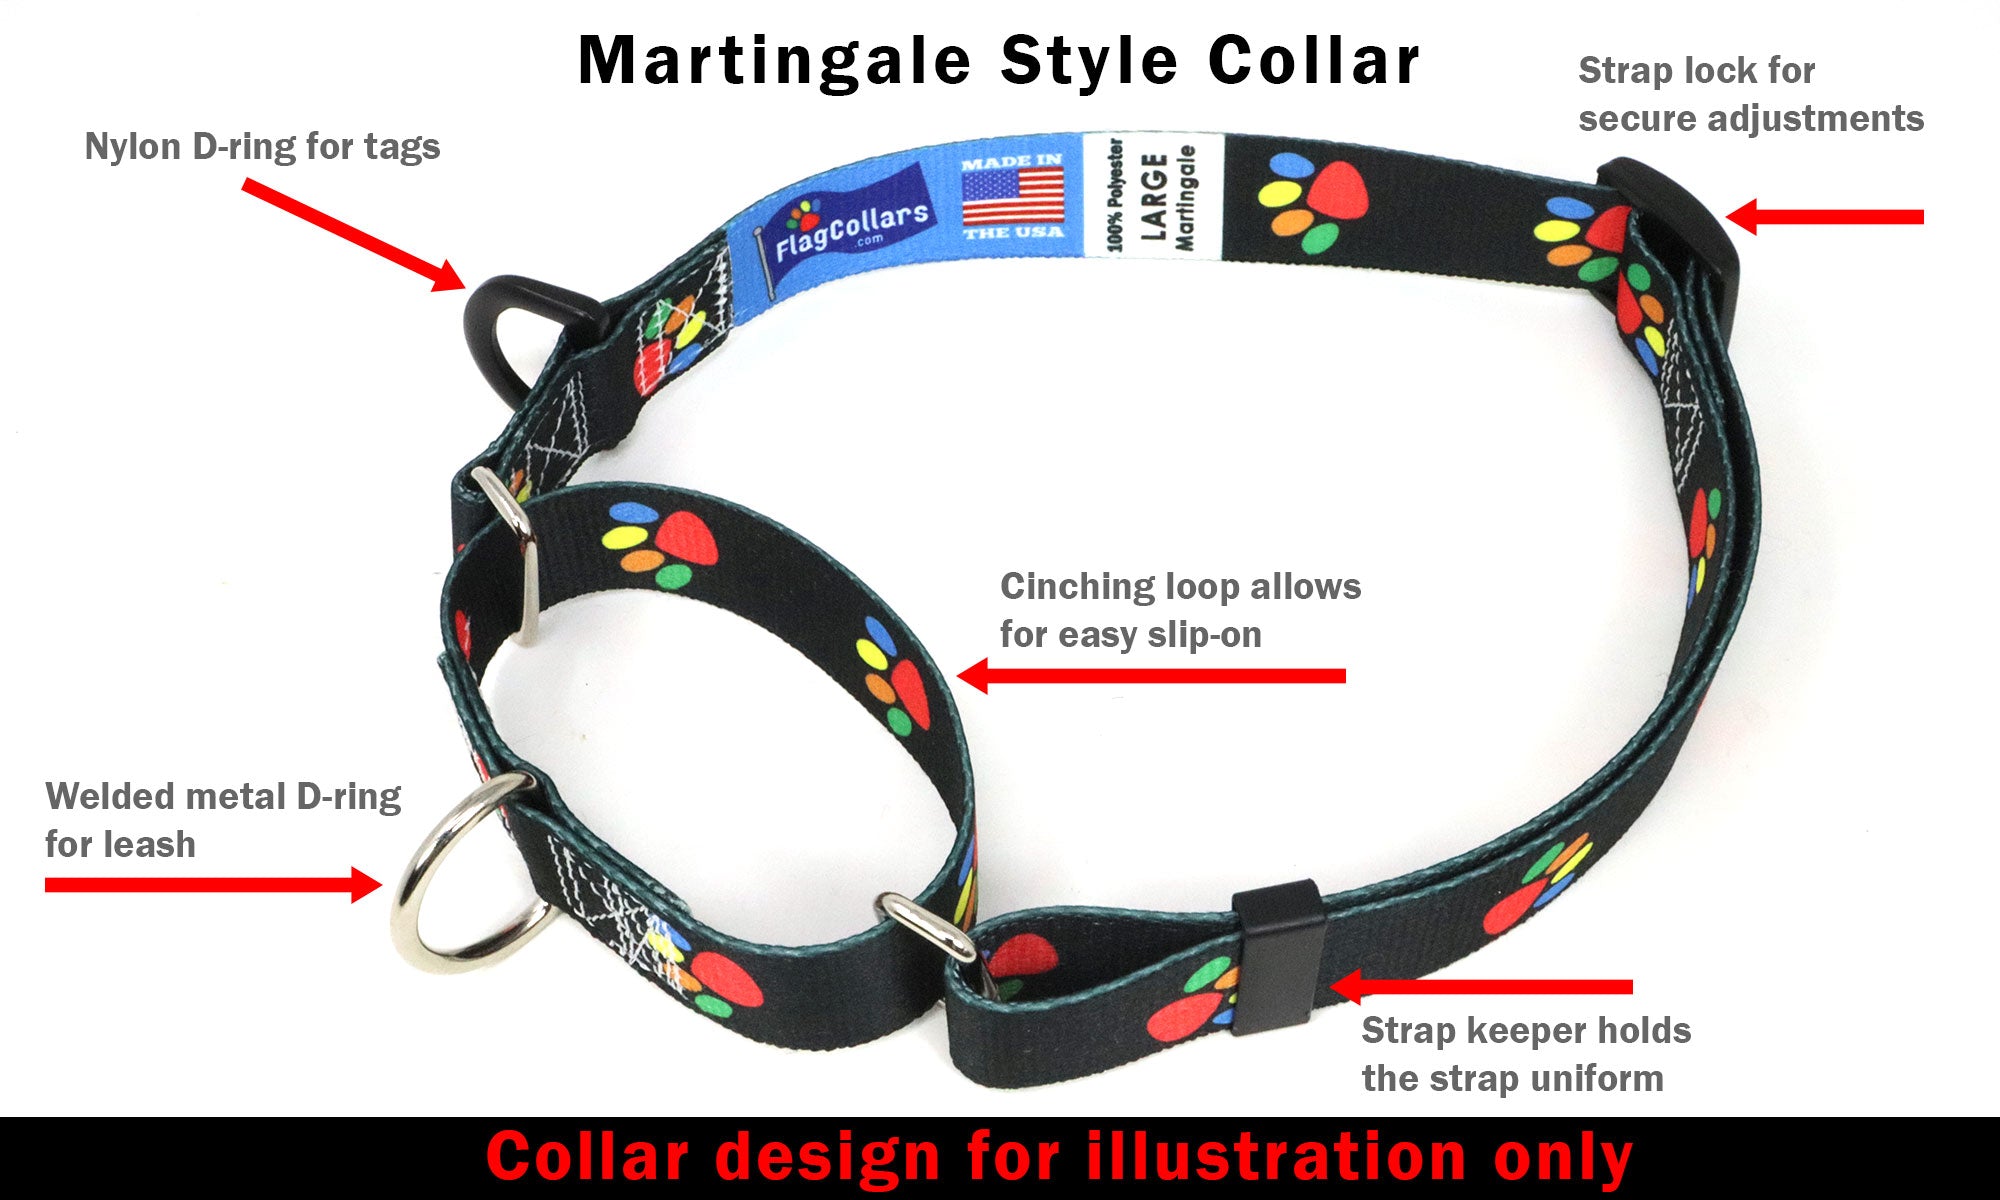 Ecuador Dog Collar for Soccer Fans | Black or Pink | Quick Release or Martingale Style | Made in NJ, USA